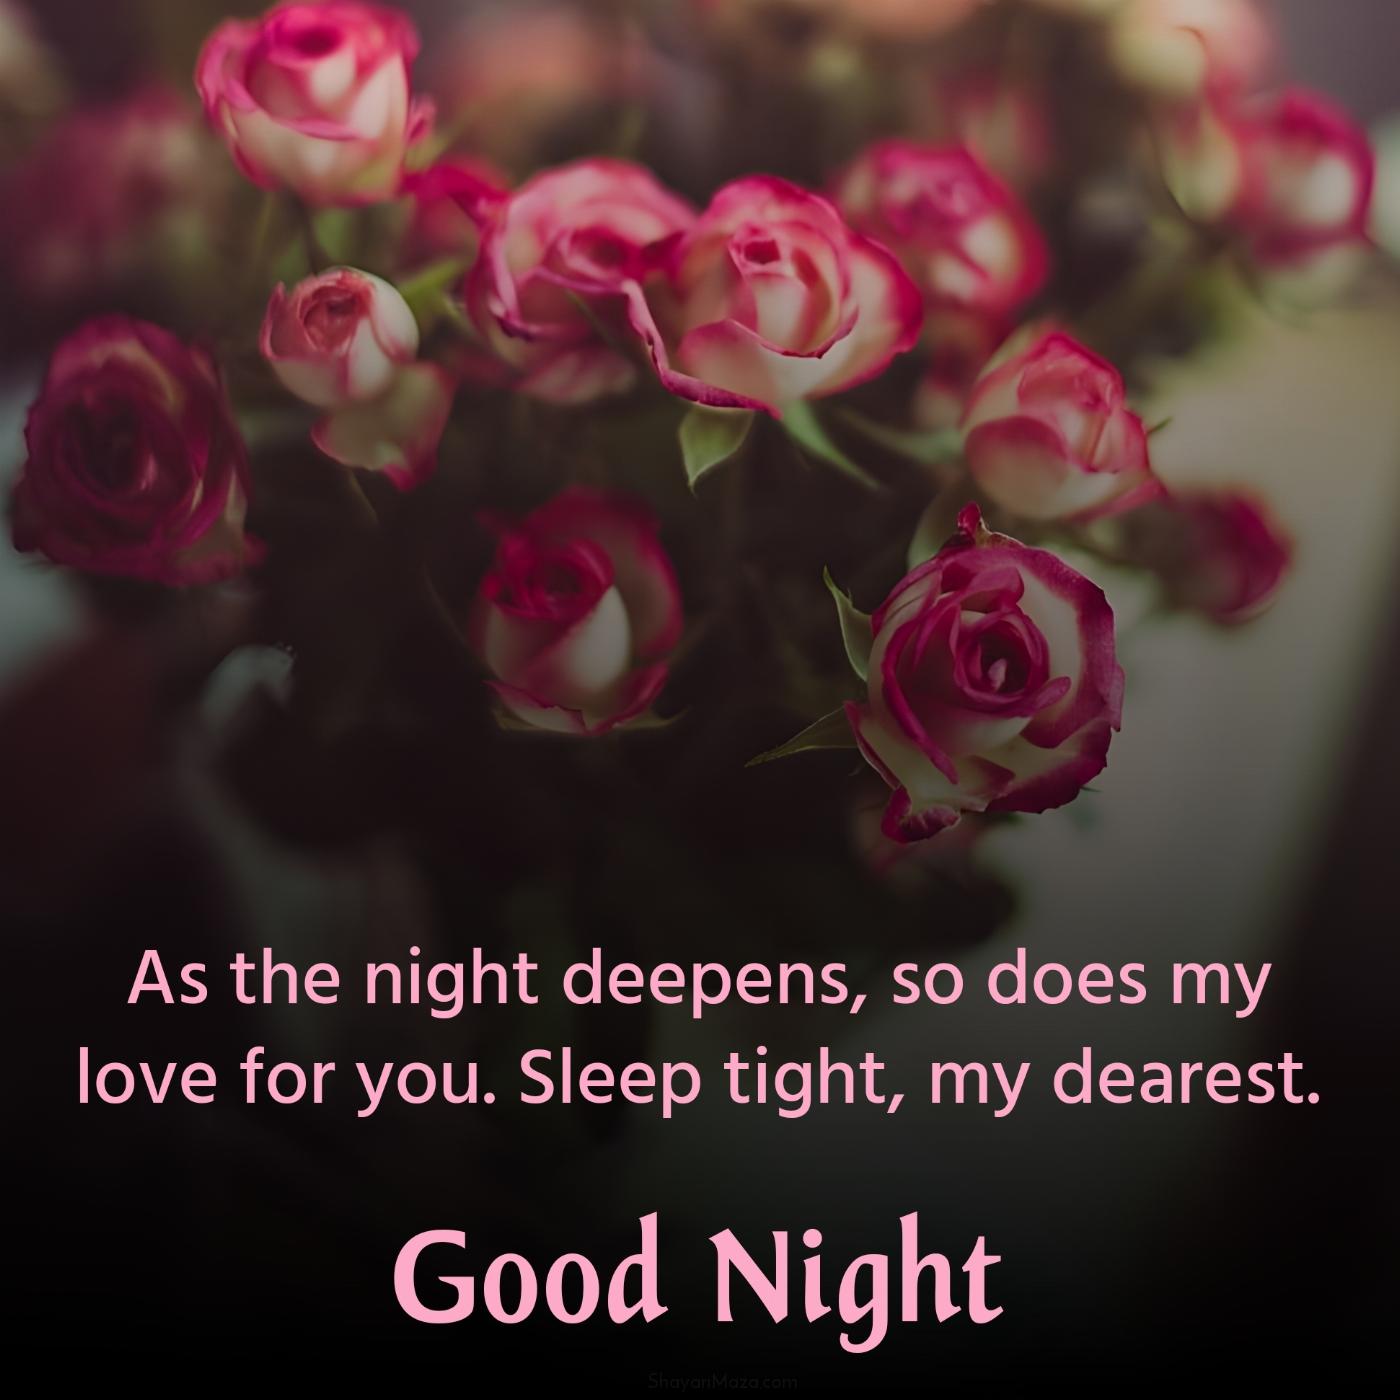 As the night deepens so does my love for you